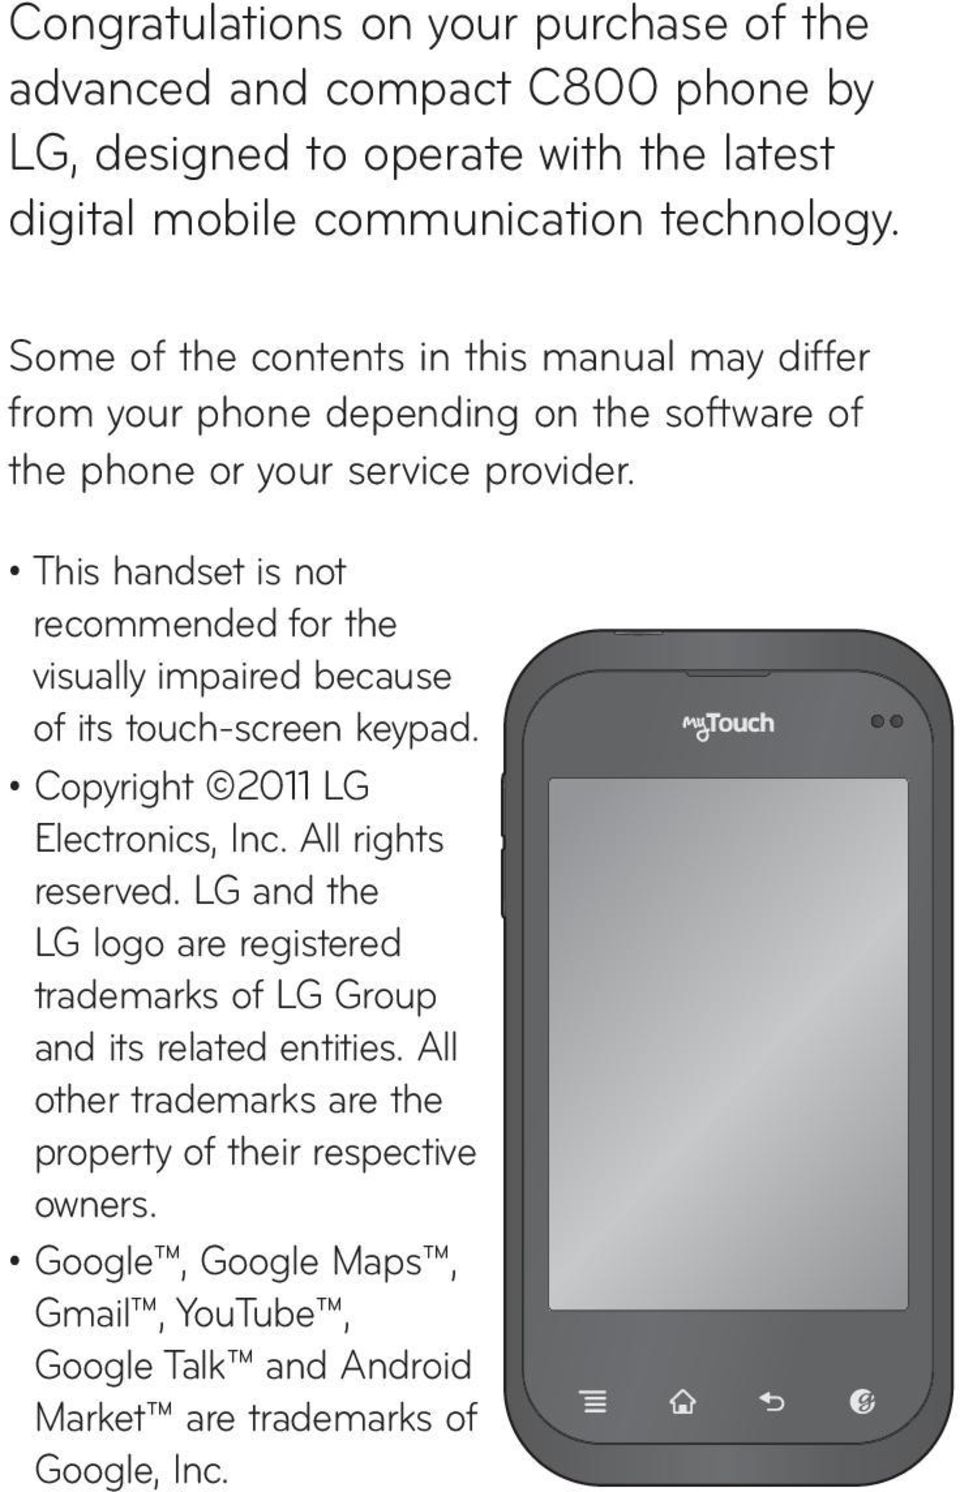 This handset is not recommended for the visually impaired because of its touch-screen keypad. Copyright 2011 LG Electronics, Inc. All rights reserved.